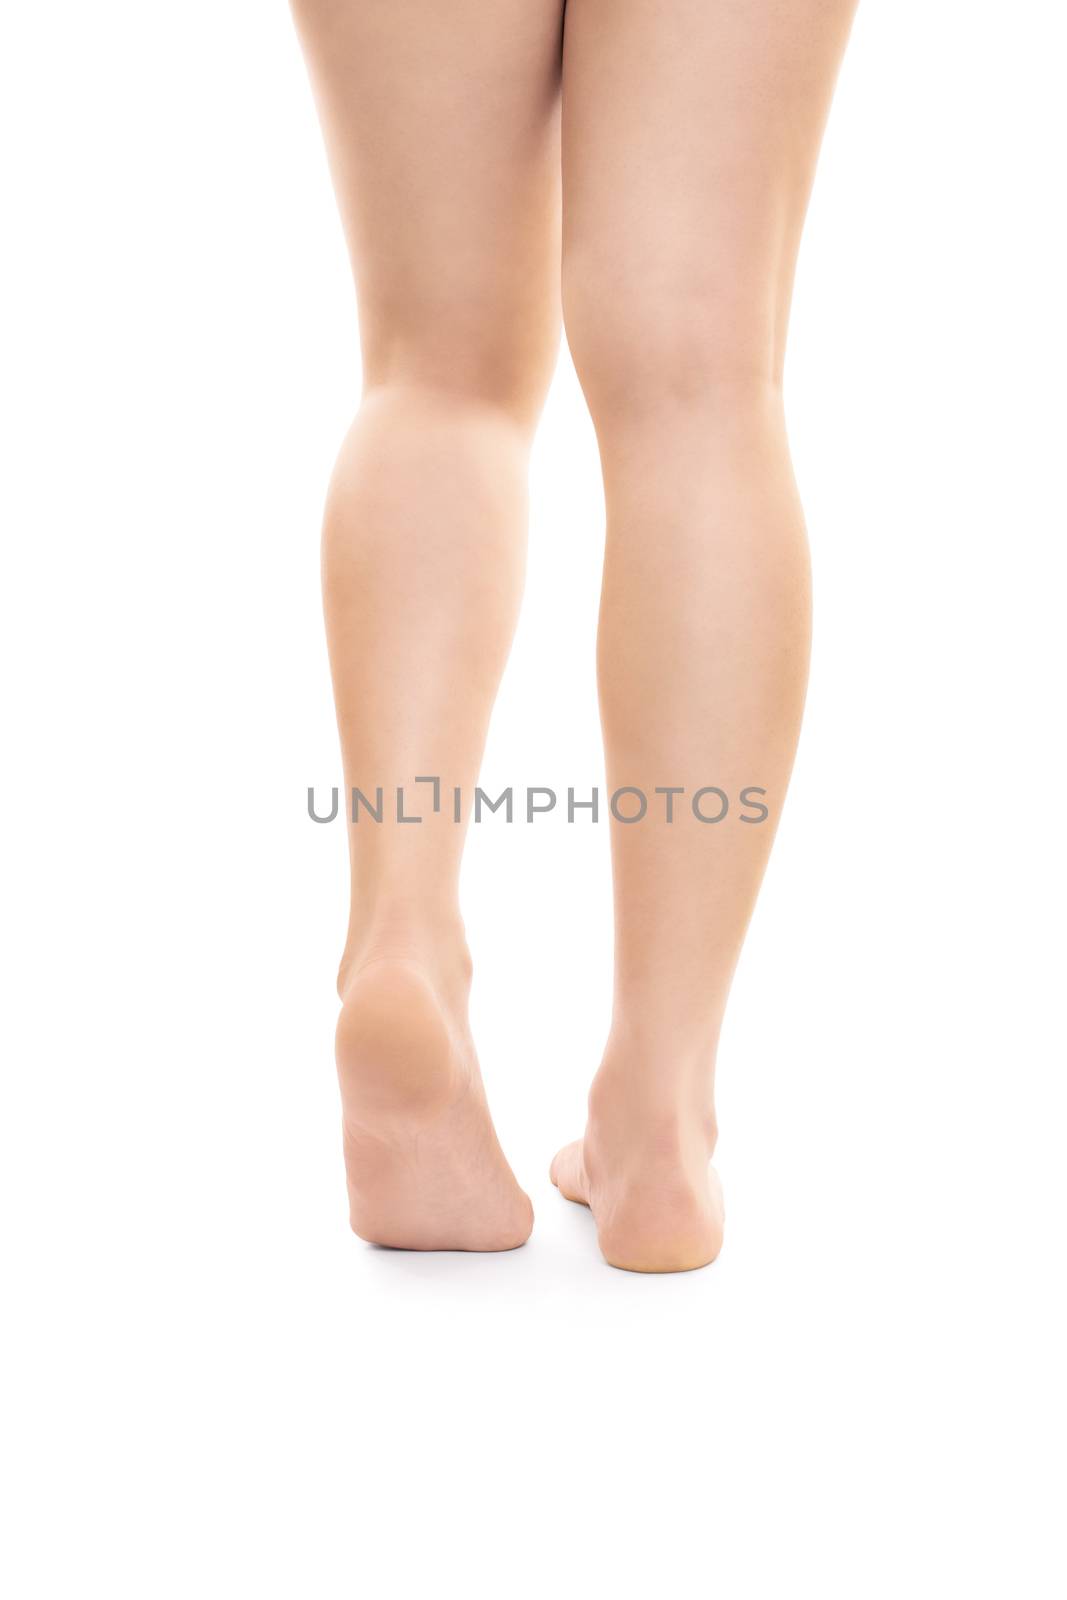 Naked female legs isolated on white background by Mendelex